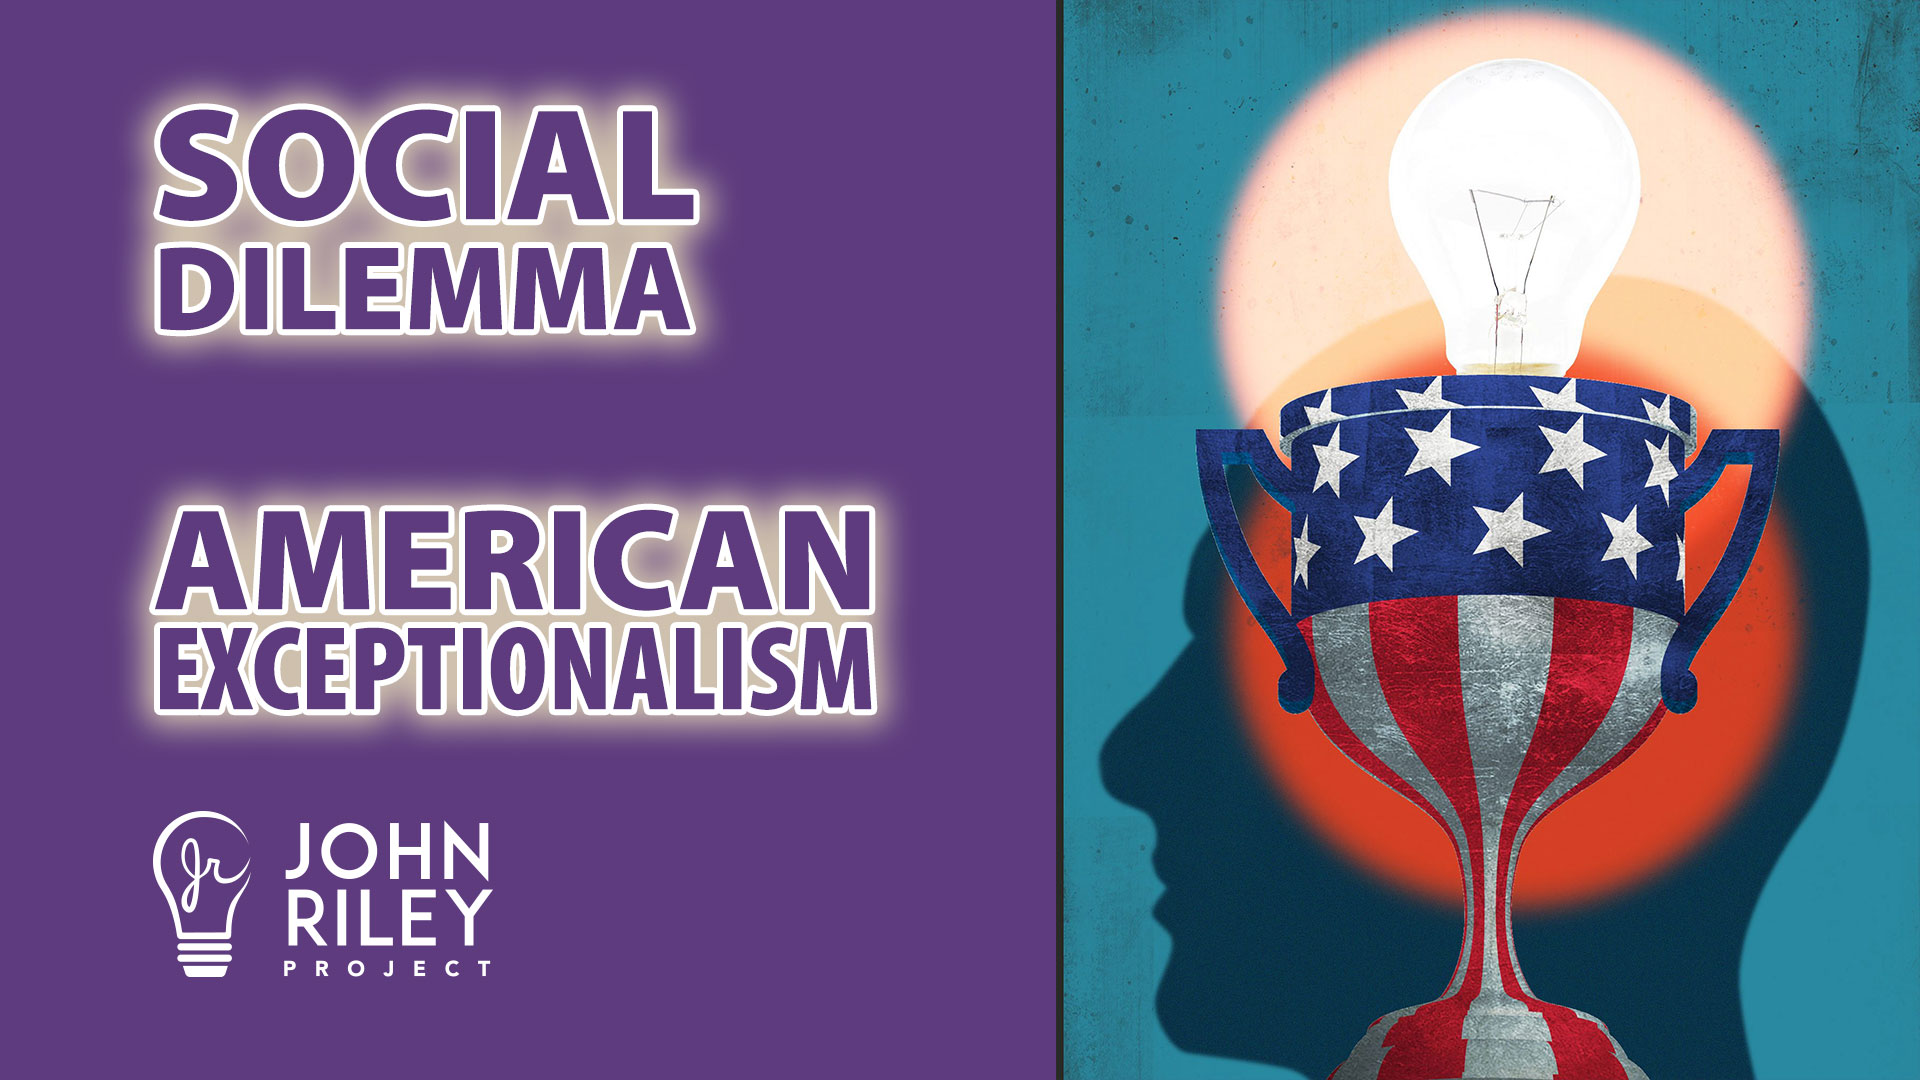 social dilemma, american exceptionalism, john riley project, jrp0166